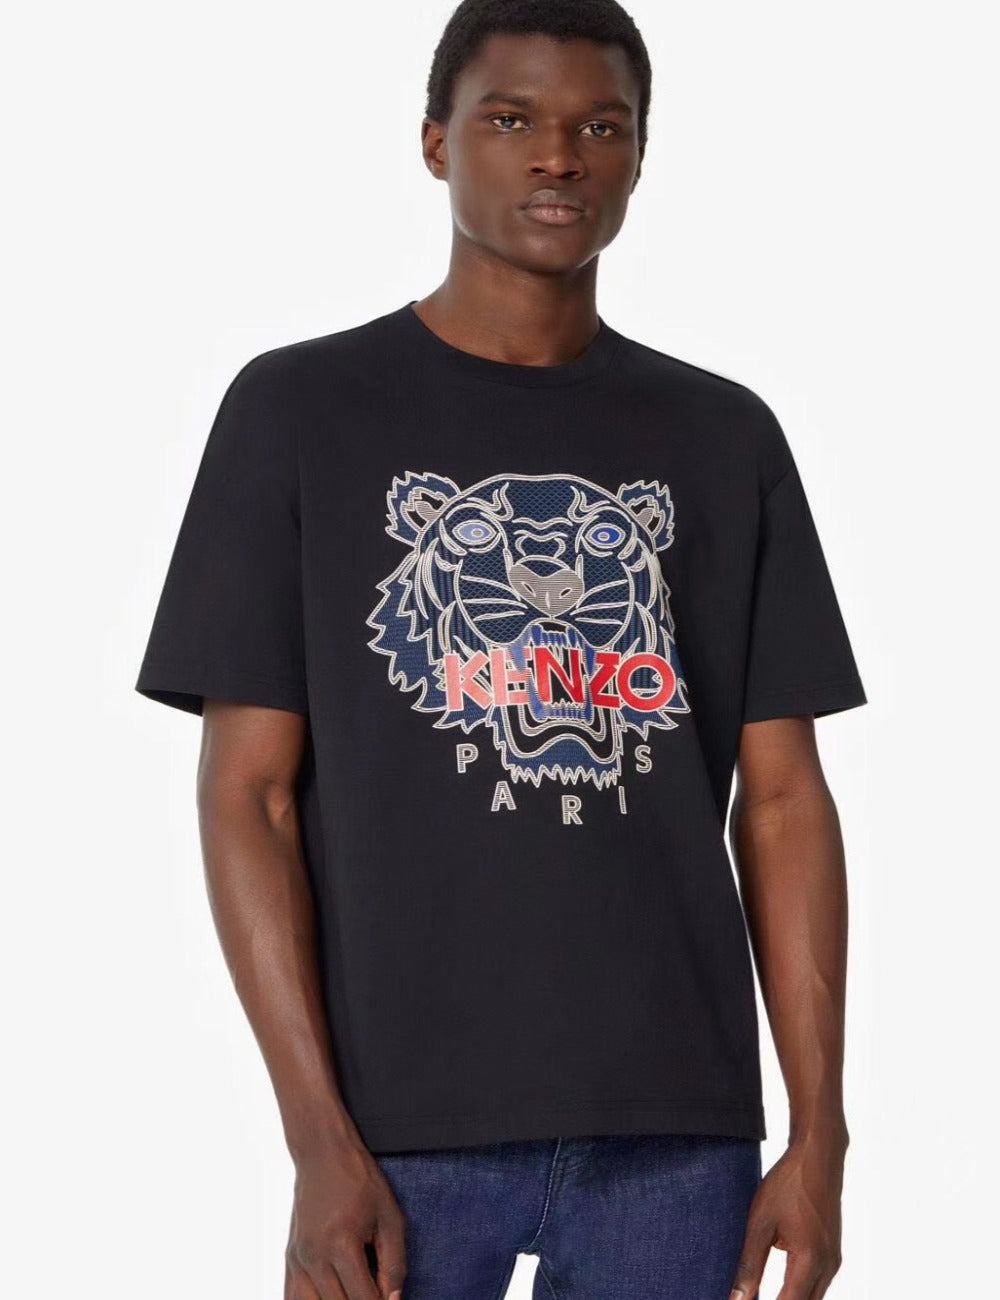 Kenzo Navy Blue Tiger Logo T-Shirt - Shop Streetwear, Sneakers, Slippers and Gifts online | Malaysia - The Factory KL